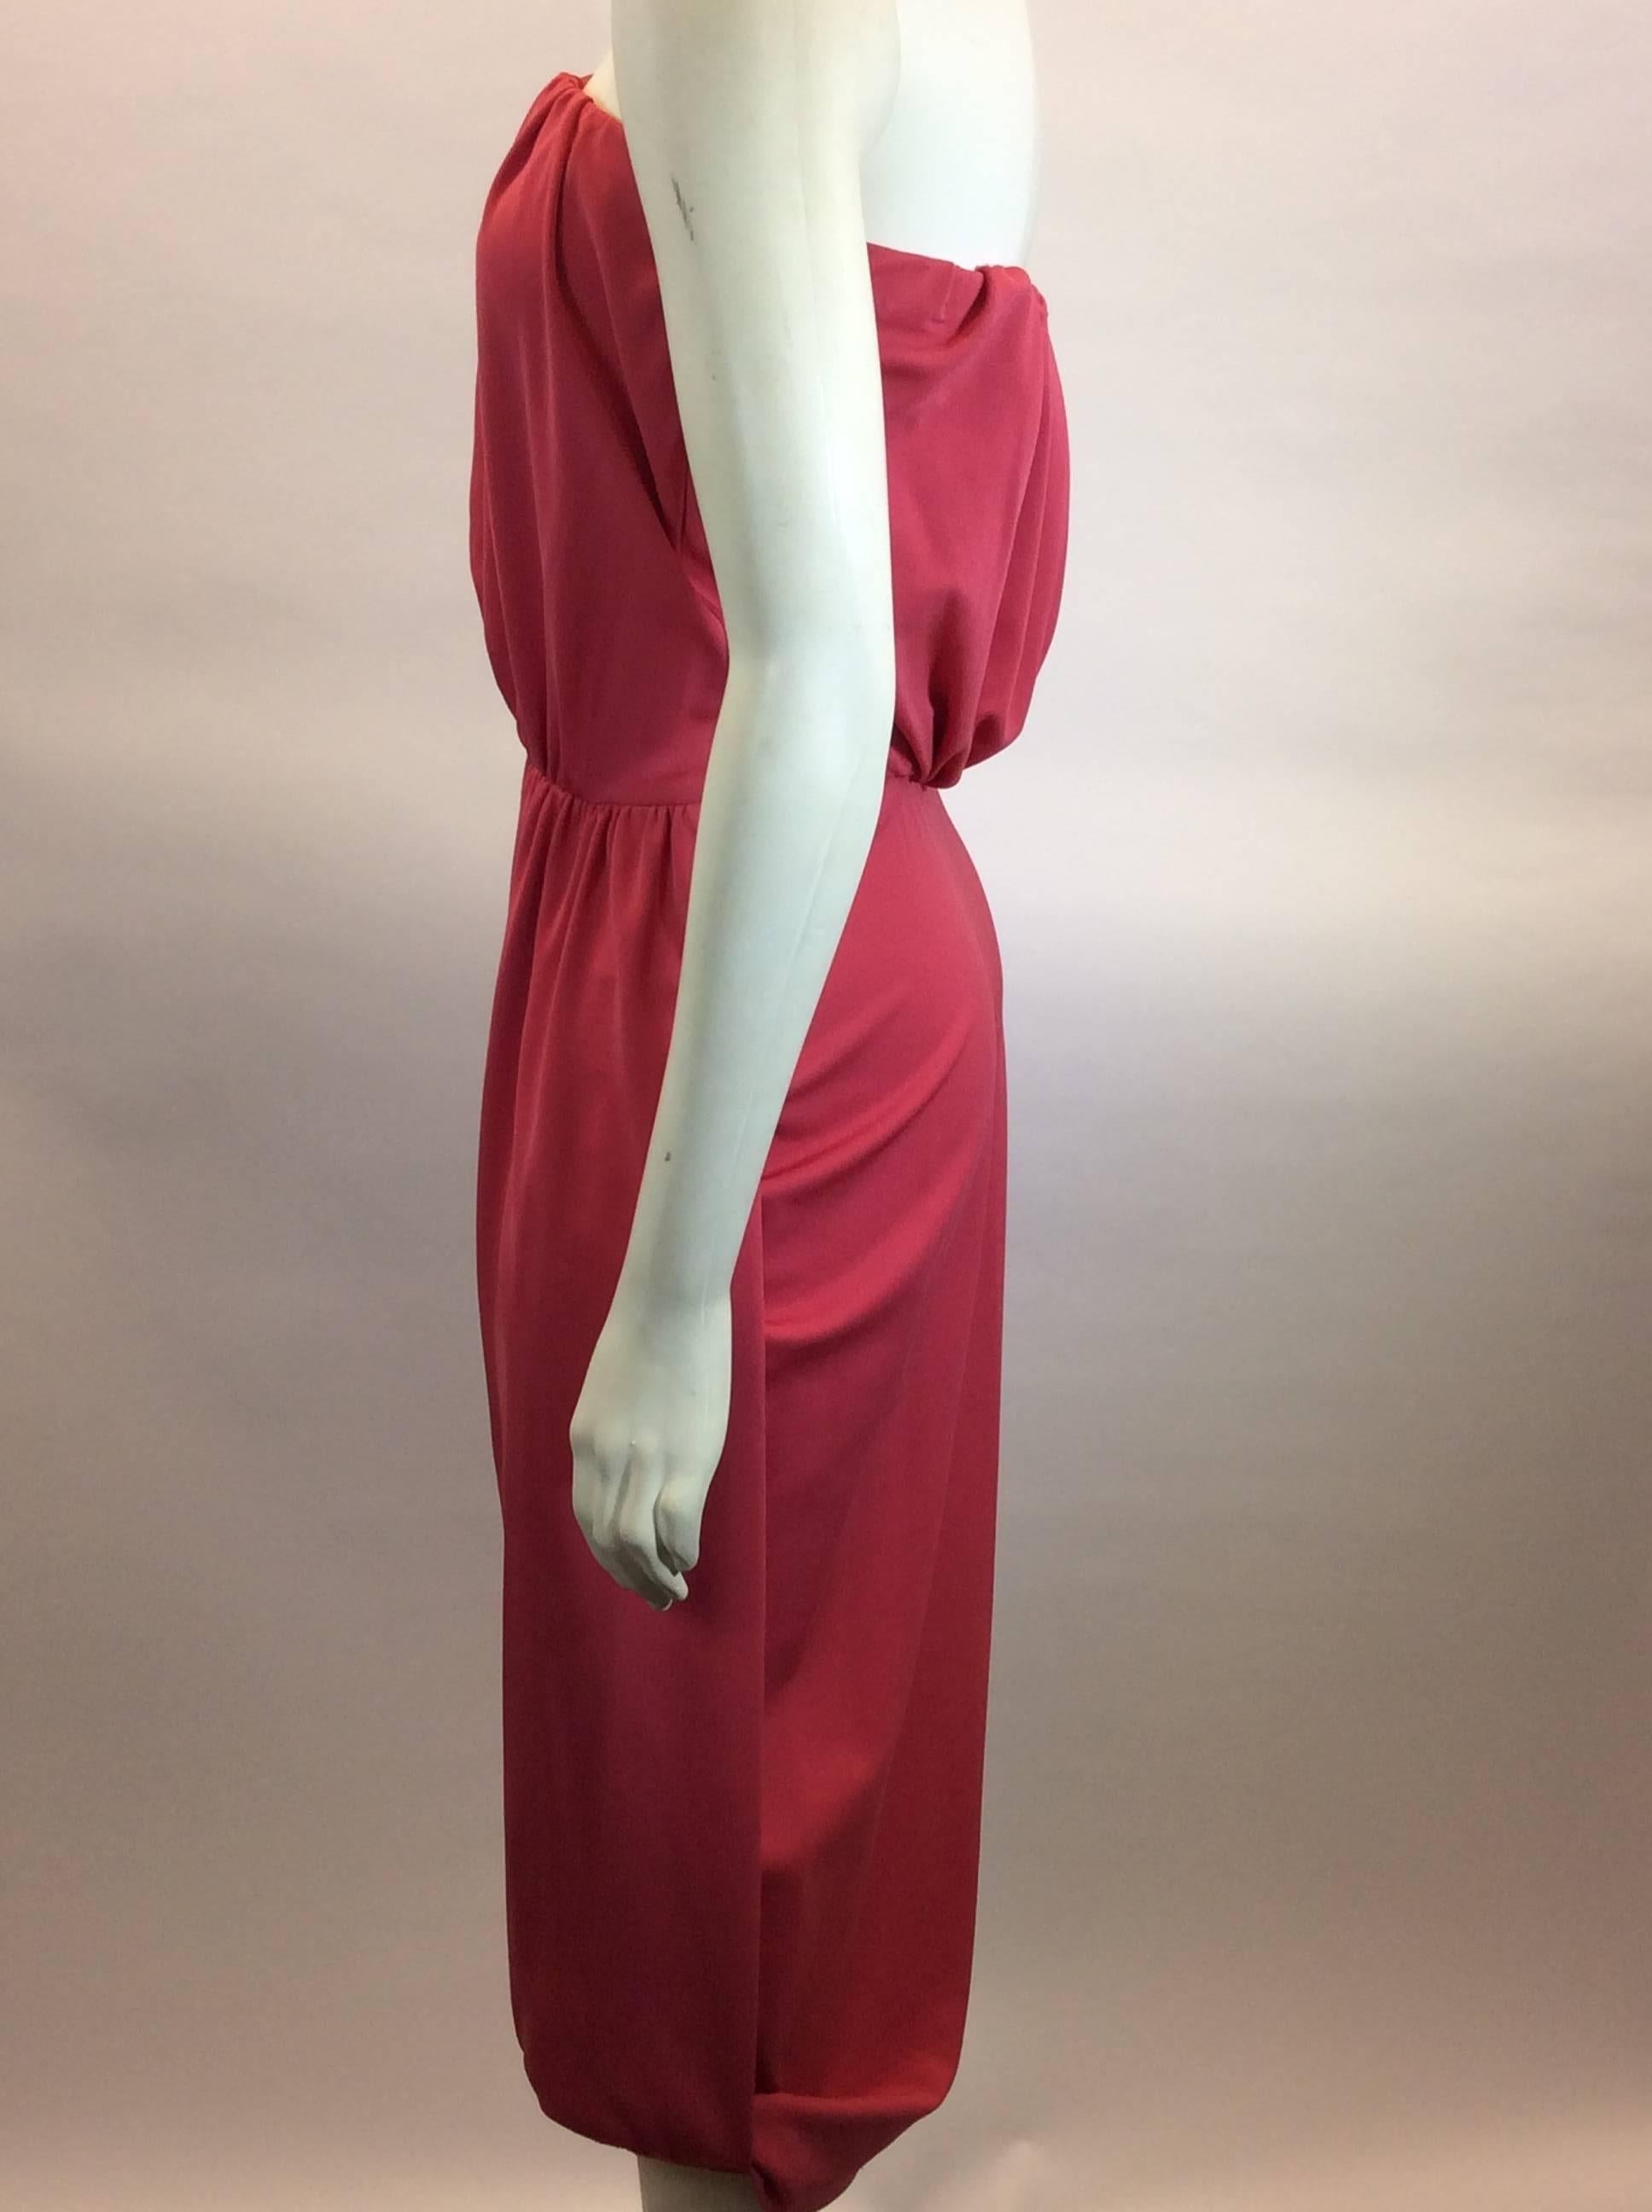 Coral Draped Strapless Dress
Elastic bustline for fit
Ruched bust and waistline with draped panel
Size Large
56% Viscose, 41% Polyester, 3% Polyurethane